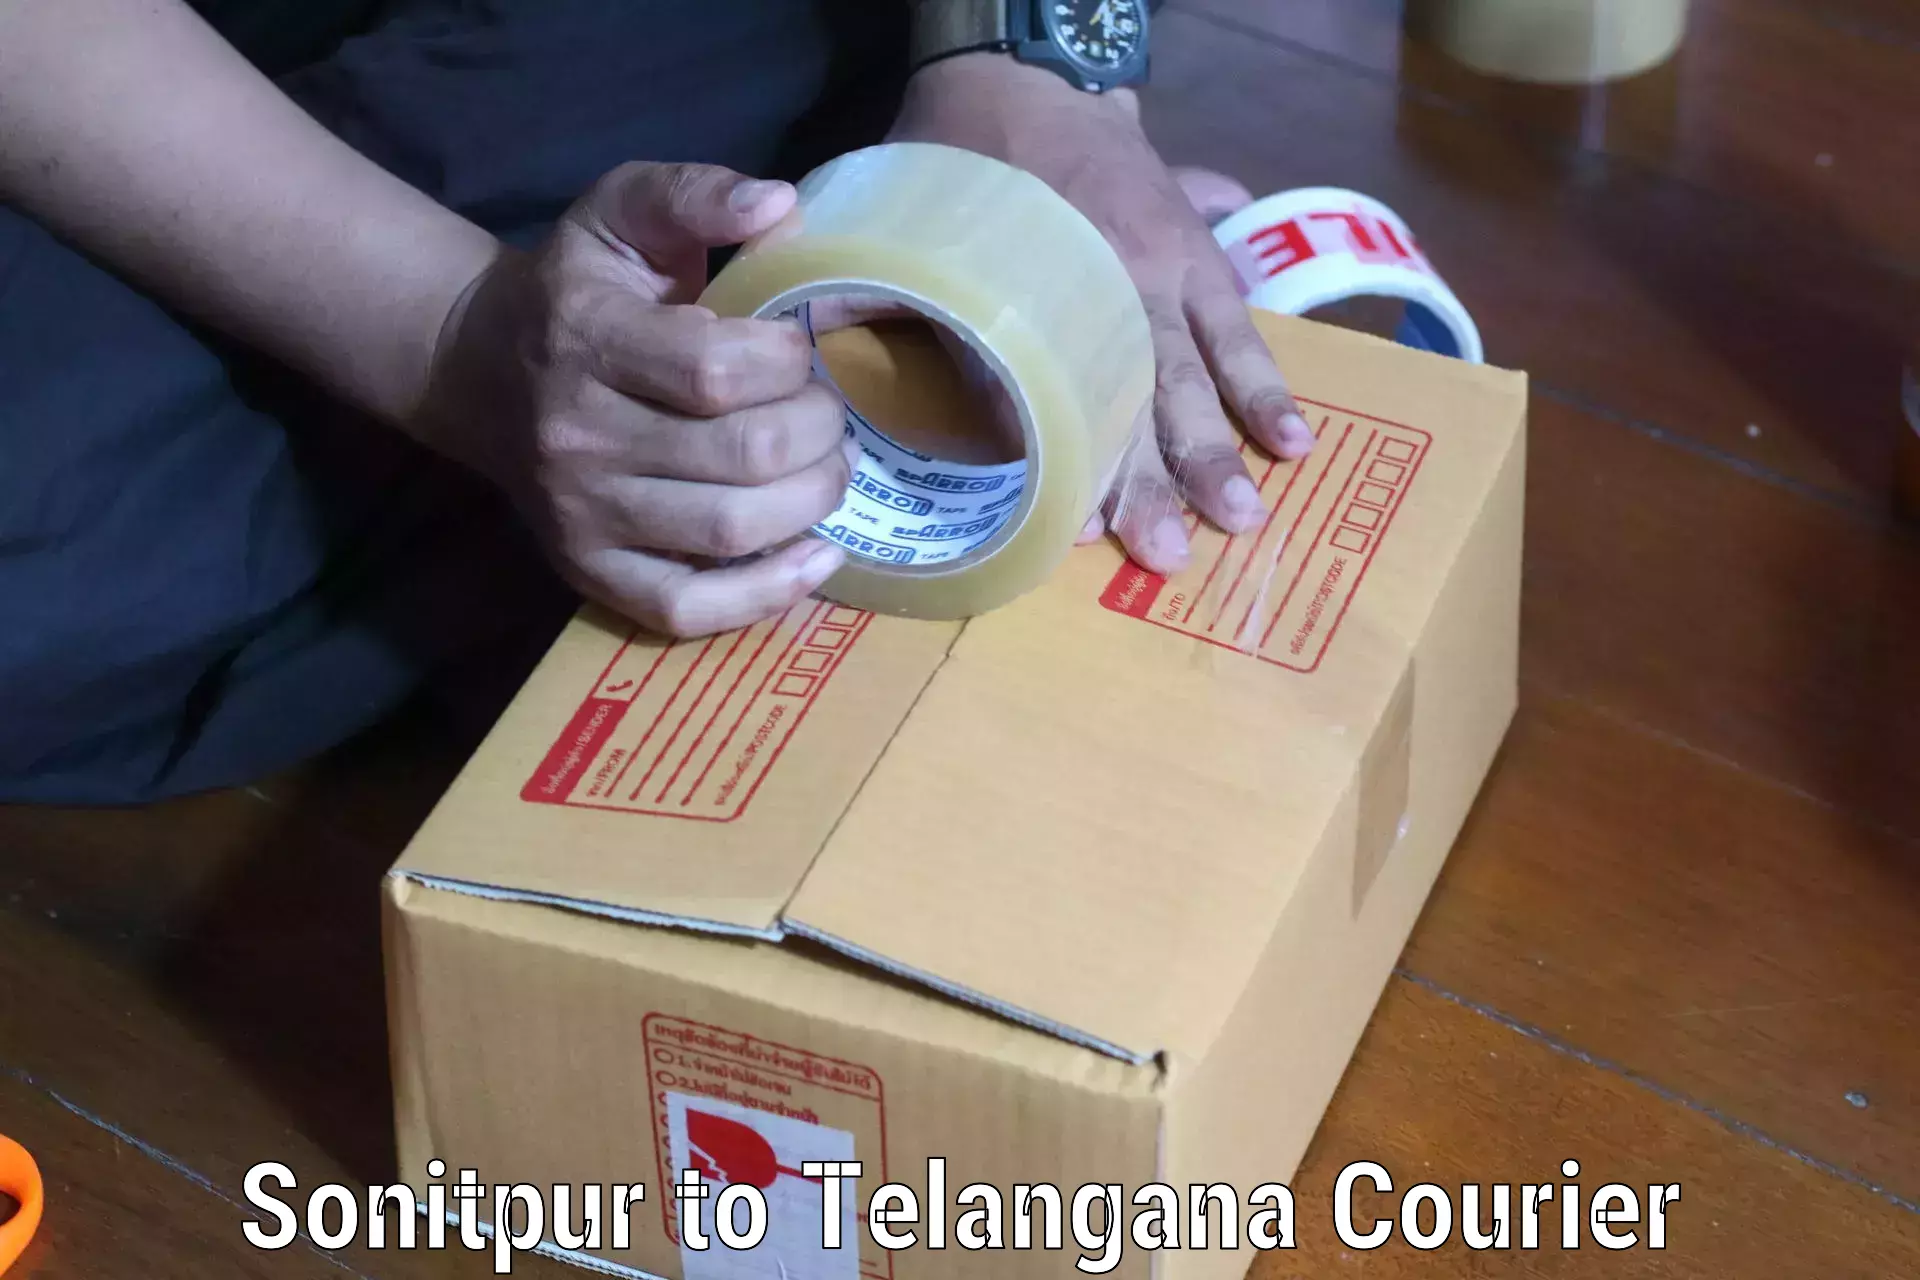 On-call courier service Sonitpur to Trimulgherry